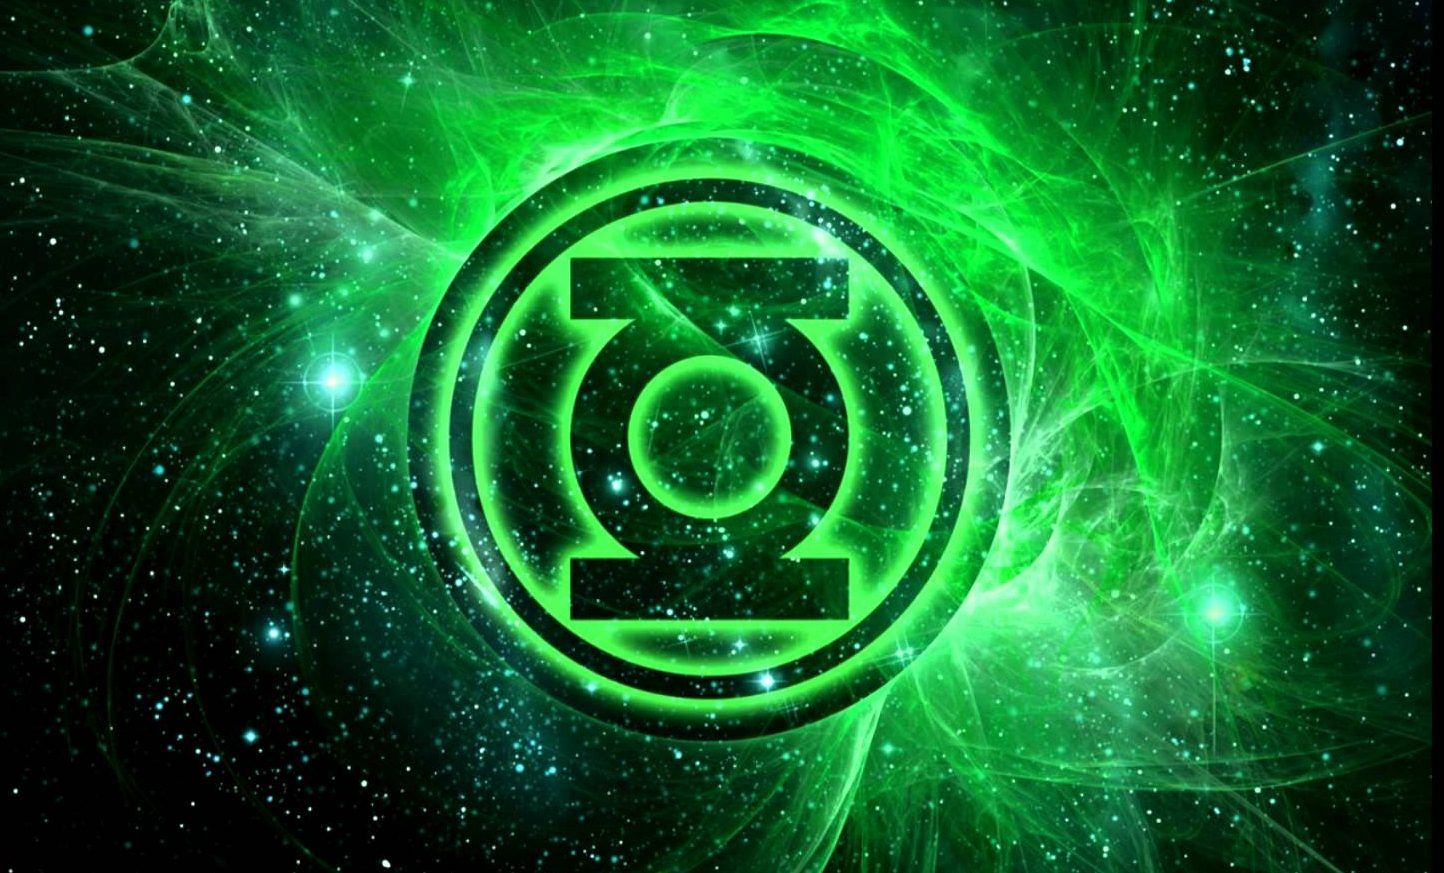 Green Lantern Corps concept art for upcoming film